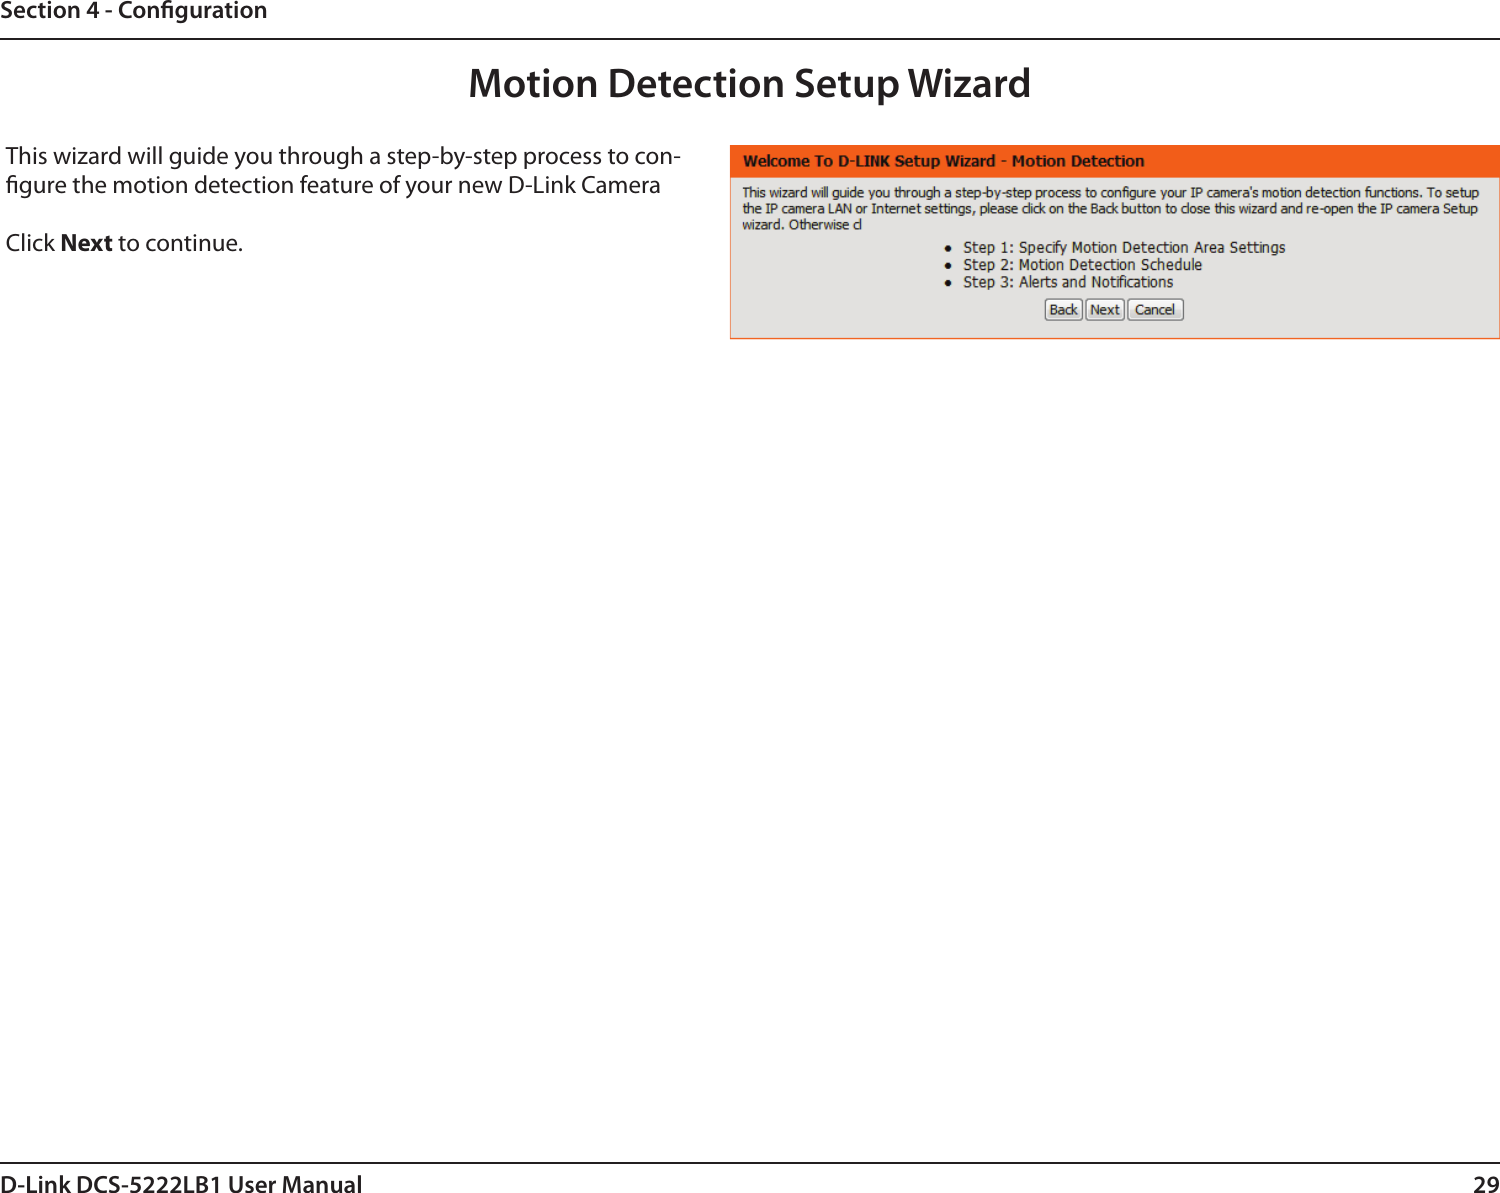 29D-Link DCS-5222LB1 User ManualSection 4 - CongurationMotion Detection Setup WizardThis wizard will guide you through a step-by-step process to con-gure the motion detection feature of your new D-Link Camera Click Next to continue.